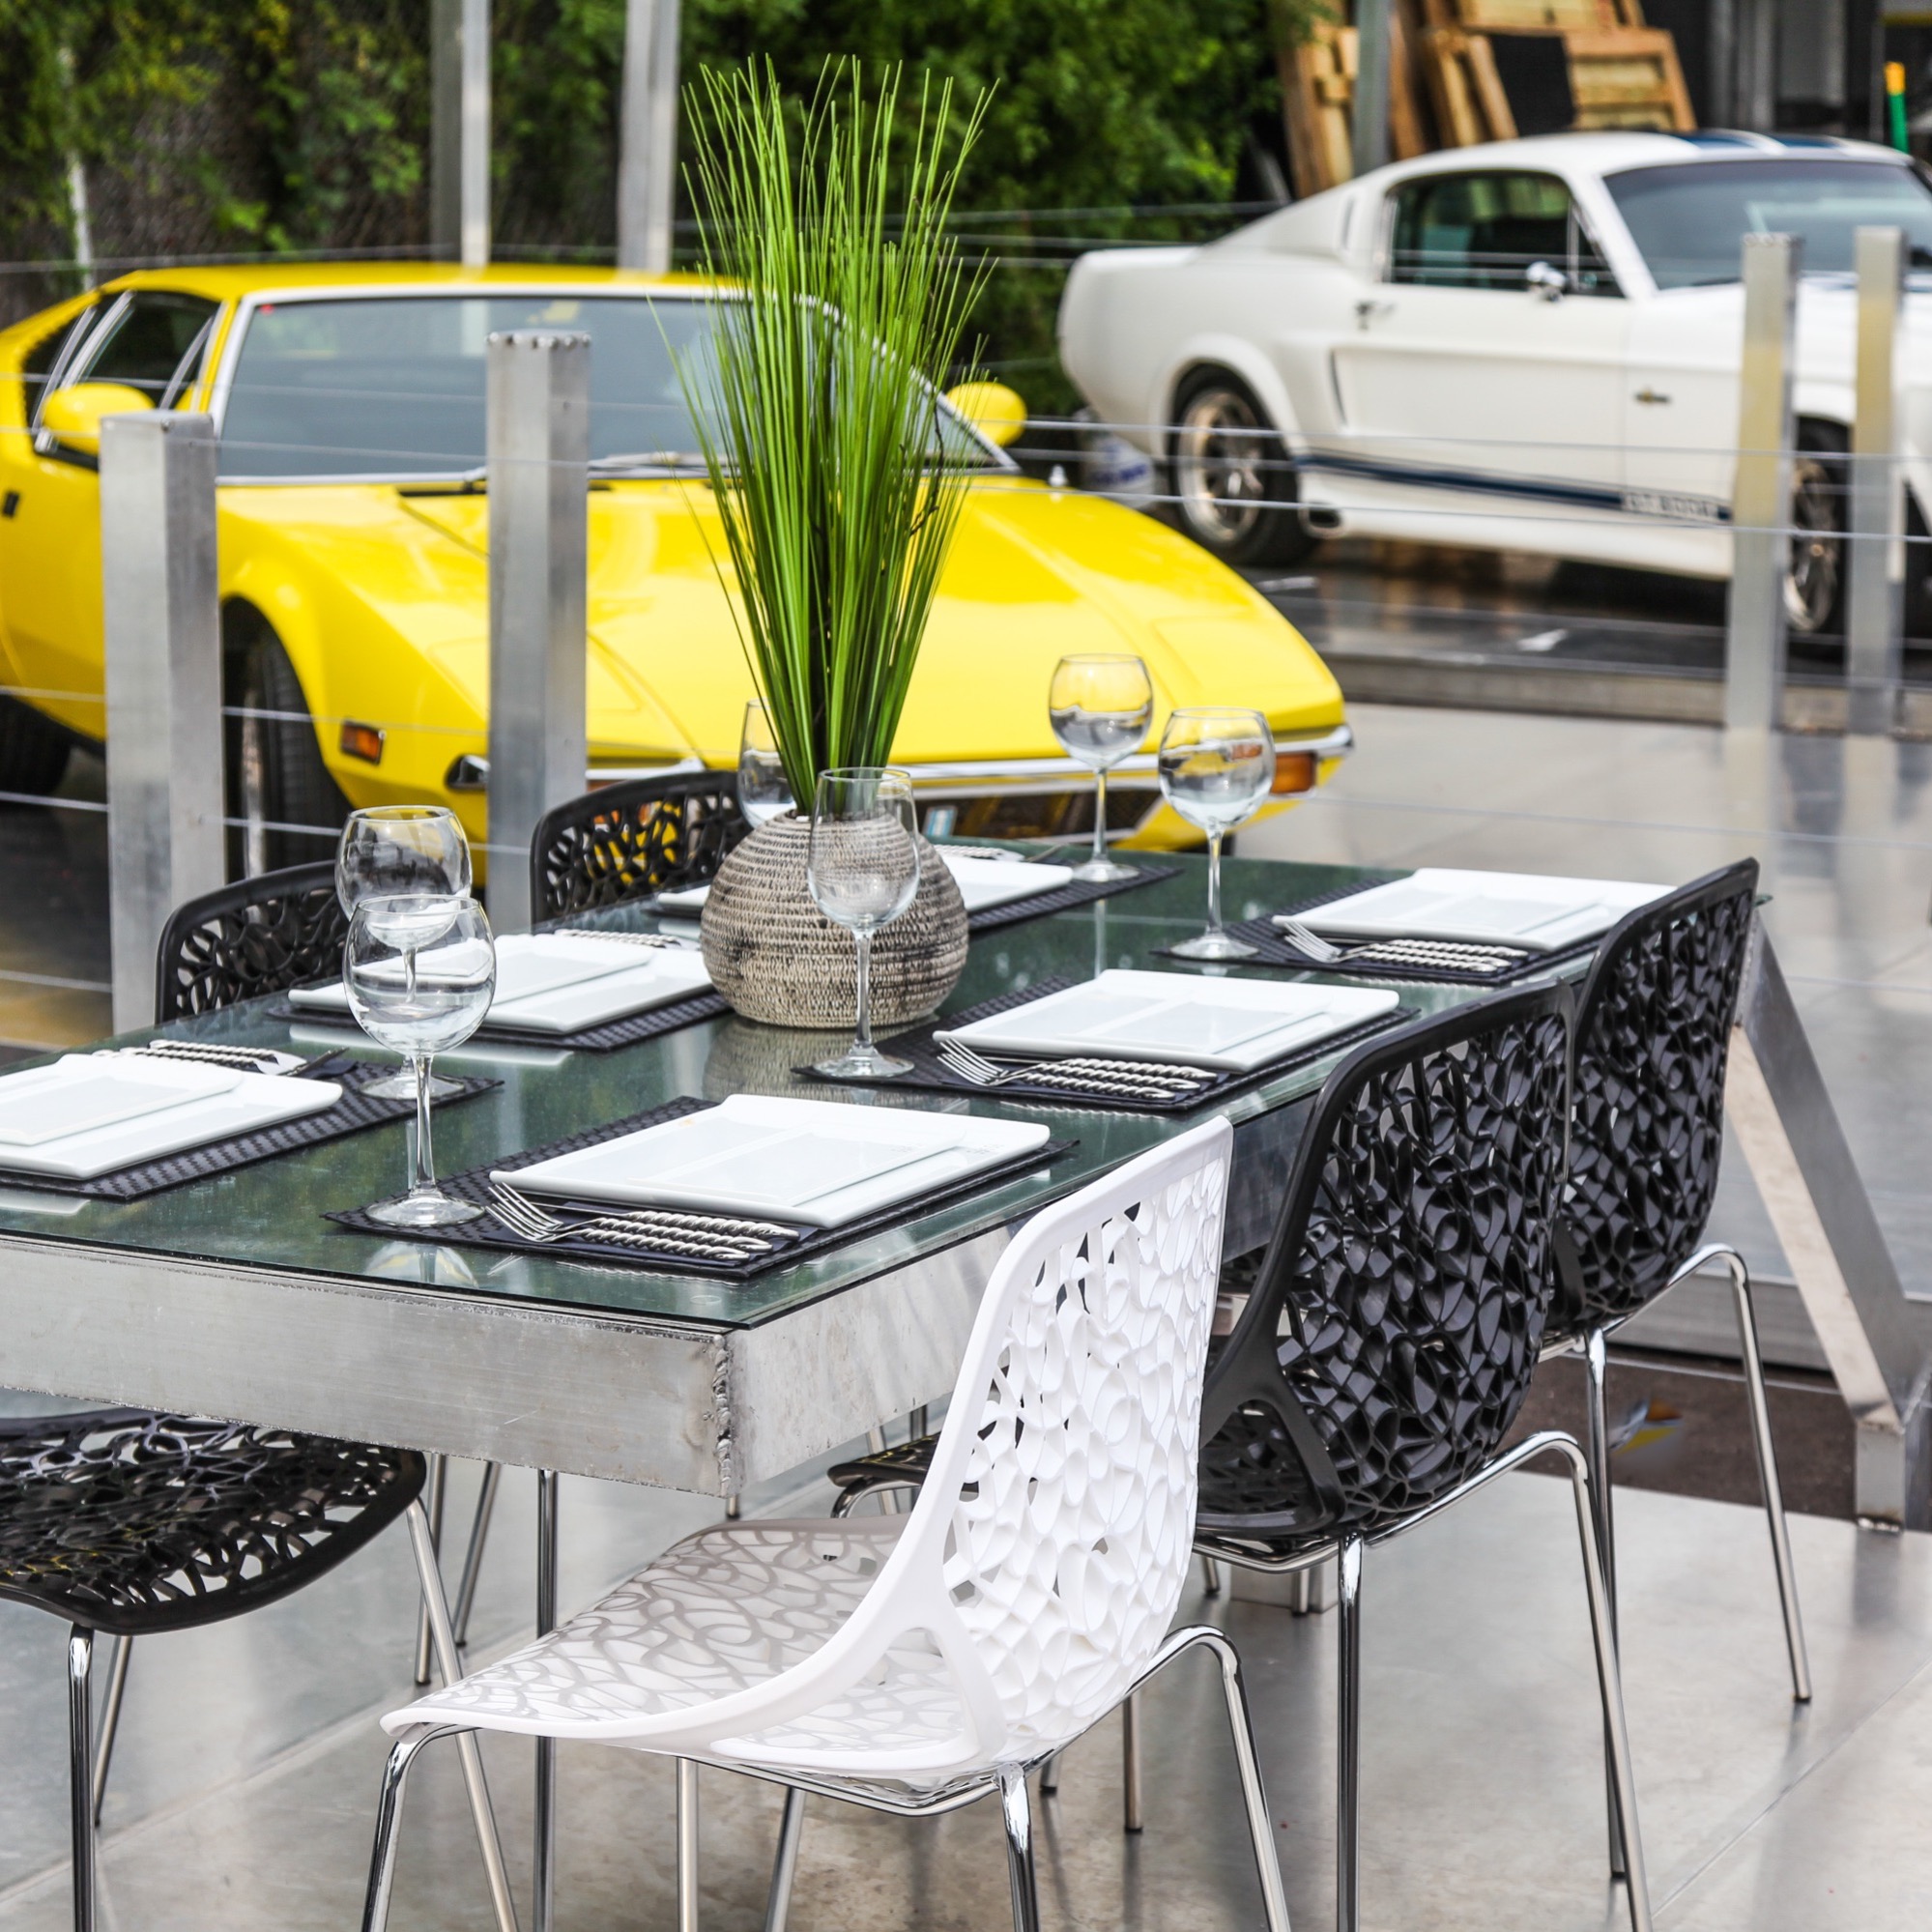 Miami Supercar Rooms Hosts Exclusive Sunday Dinner Starting February 14 